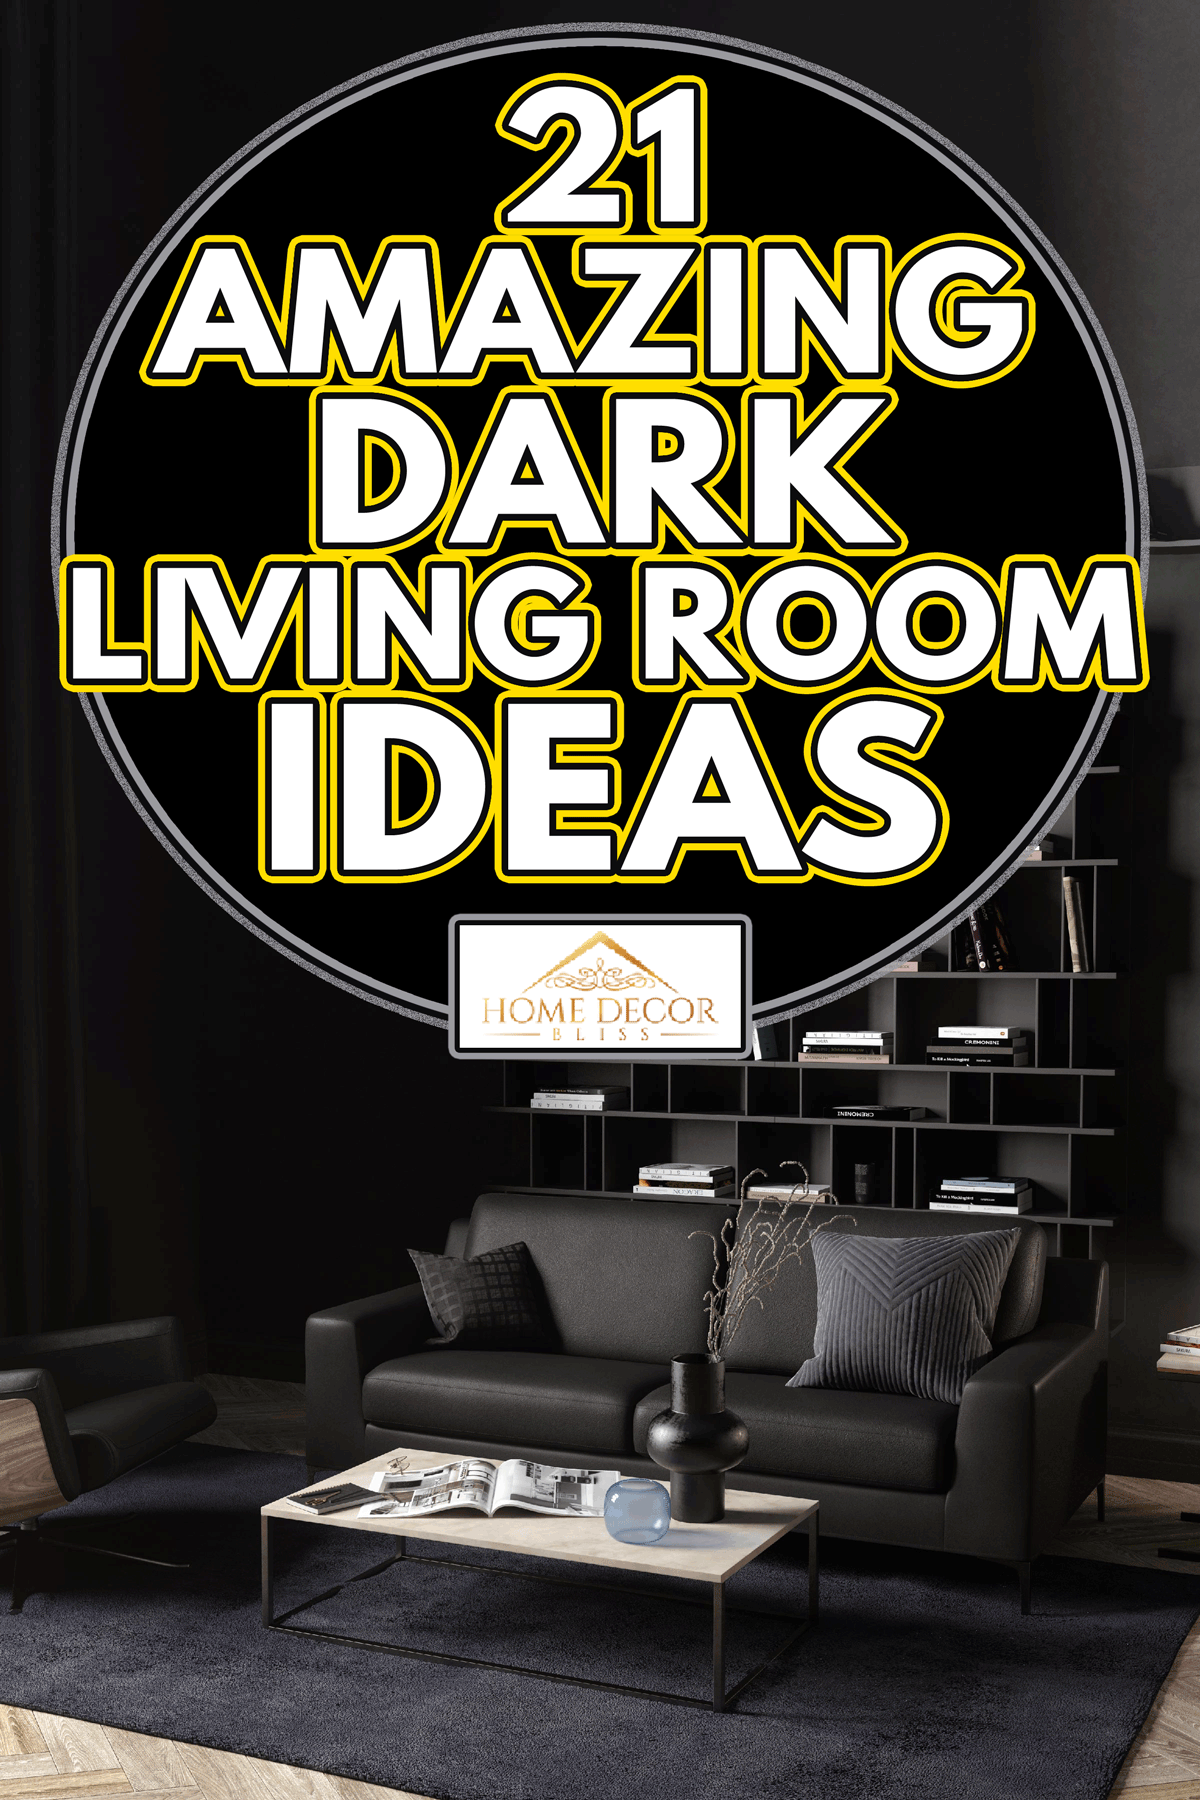 Dark living room interior with a leather sofa, seat and coffee table, 21 Amazing Dark Living Room Ideas